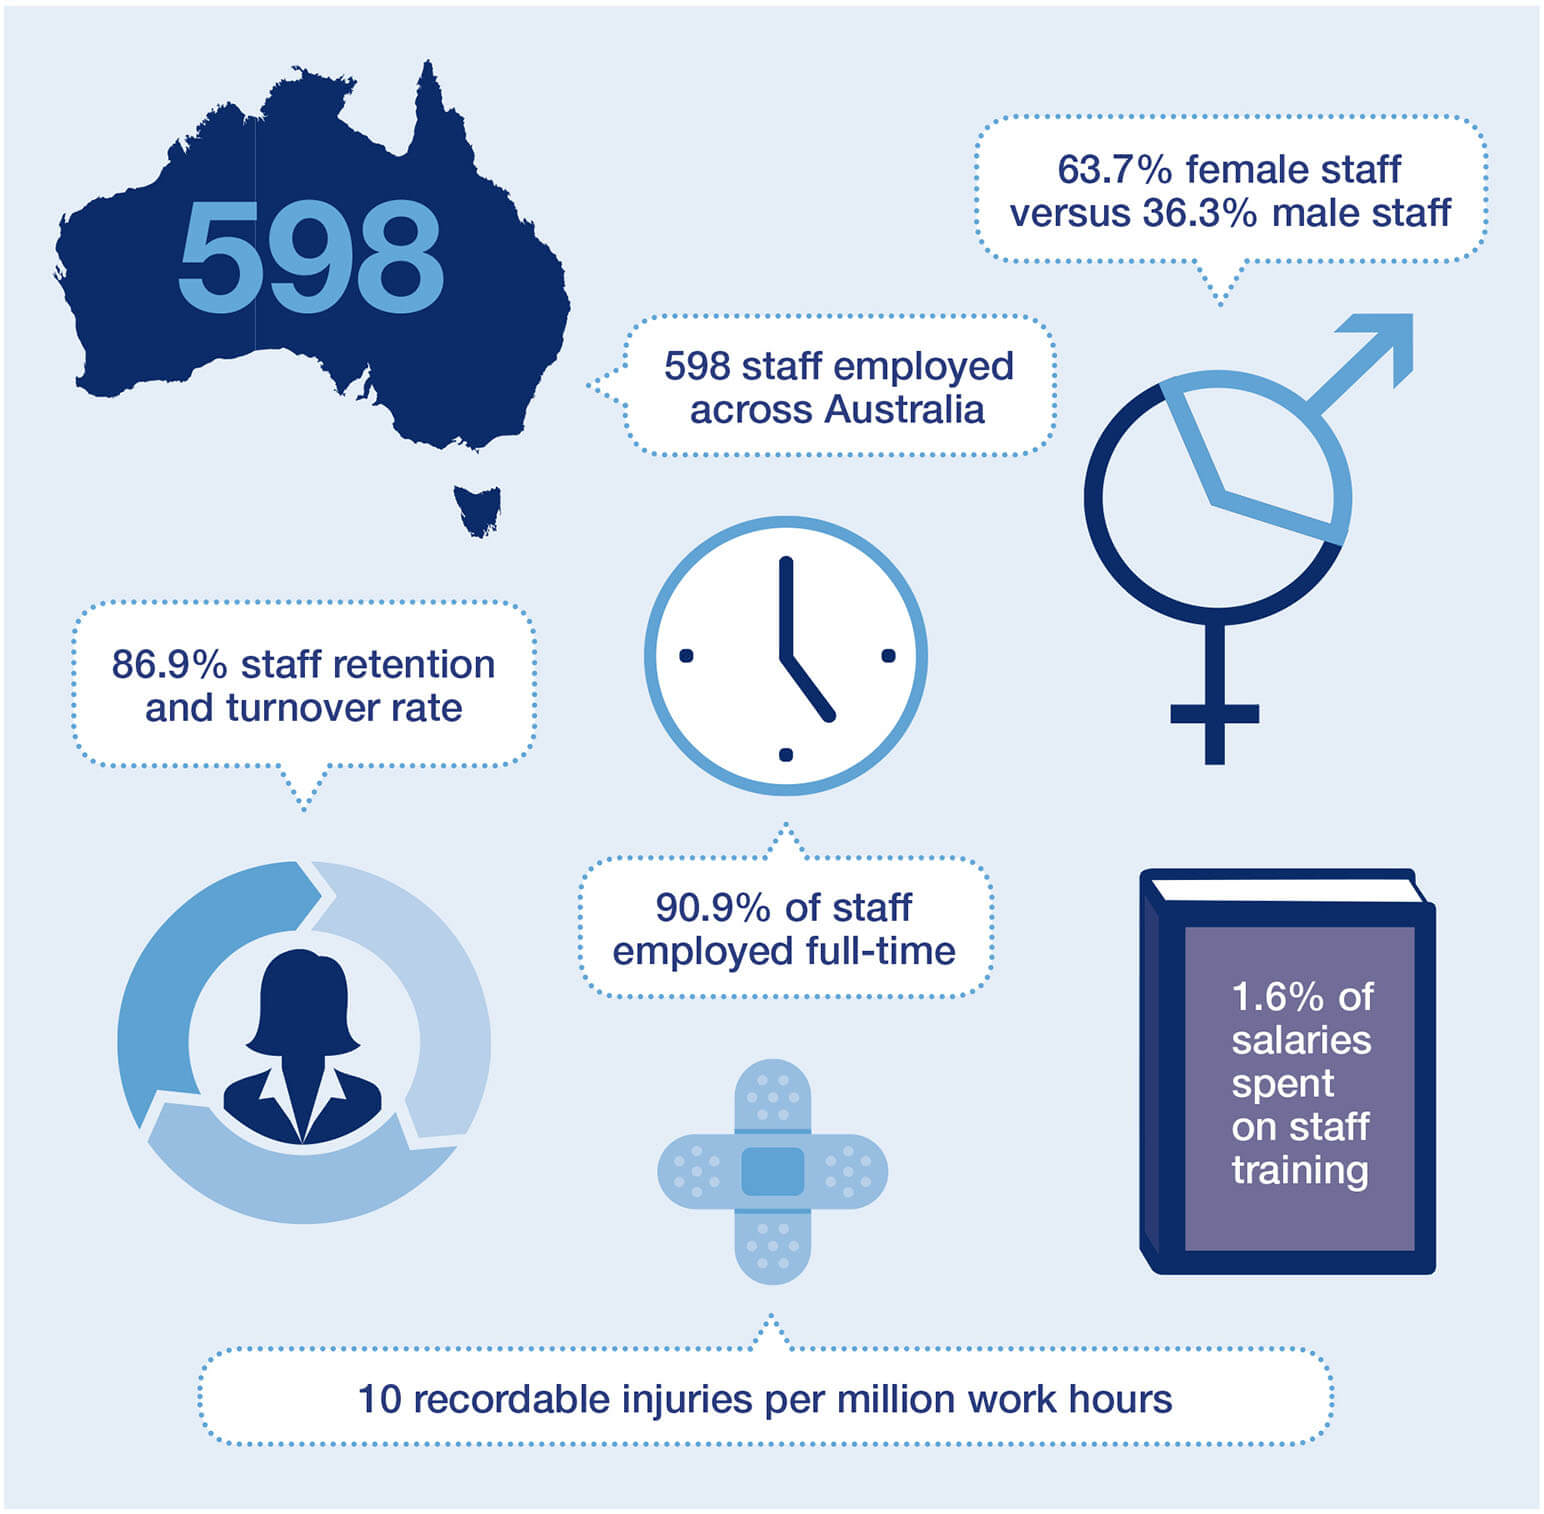 63.7% female staff versus 36.3% male staff. 598 staff employed across Australia. 86.9% staff retention and turnover rate. 90.9% of staff employed full-time. 1.6% of salaries spent on staff training. 10 recordable injuries per million work hours.